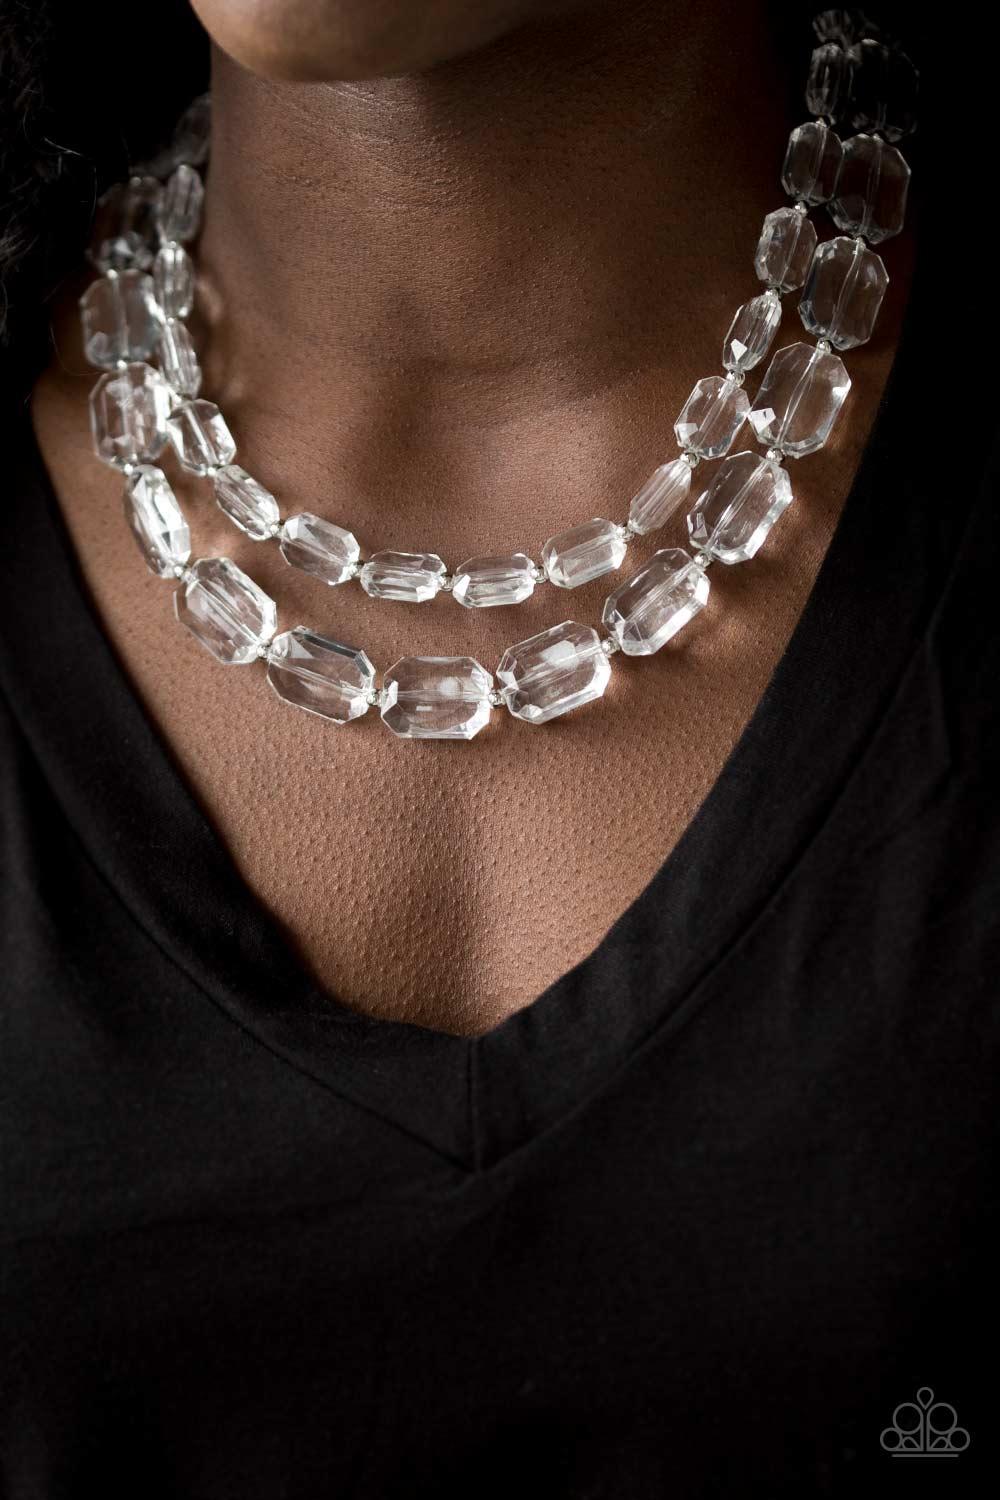 Paparazzi Accessories Ice Bank - White Infused with dainty silver beads, glassy white emerald-cut beads layer below the collar for an edgy look. Features an adjustable clasp closure. Sold as one individual necklace. Includes one pair of matching earrings.